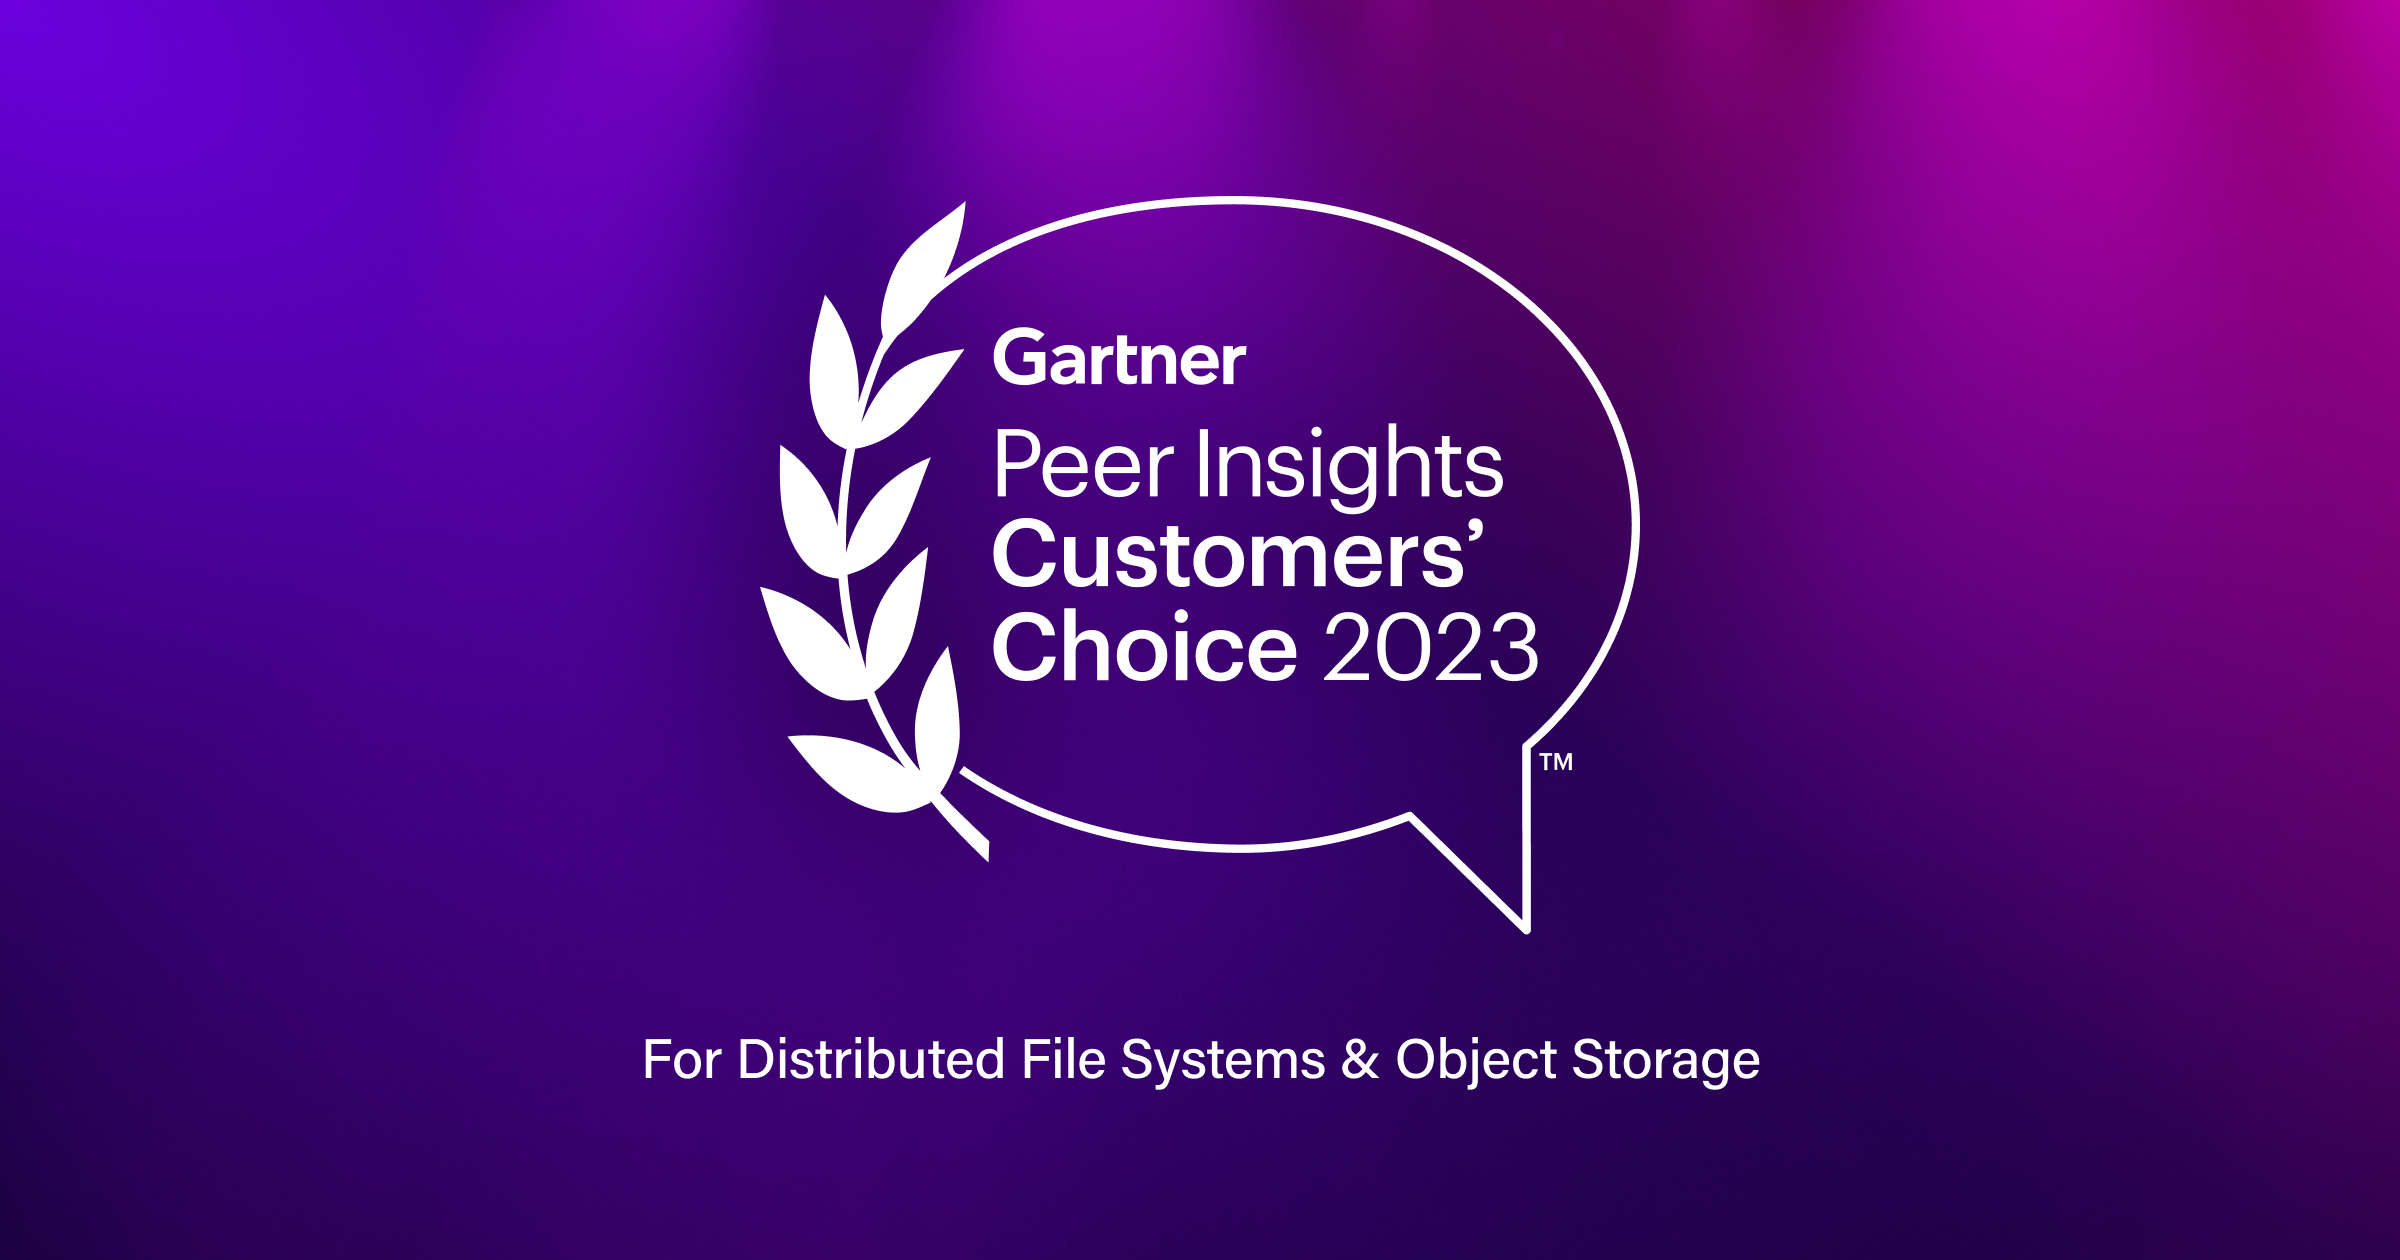 WEKA Recognized as a 2023 Gartner® Peer Insights™ Customers’ Choice for Distributed File Systems and Object Storage